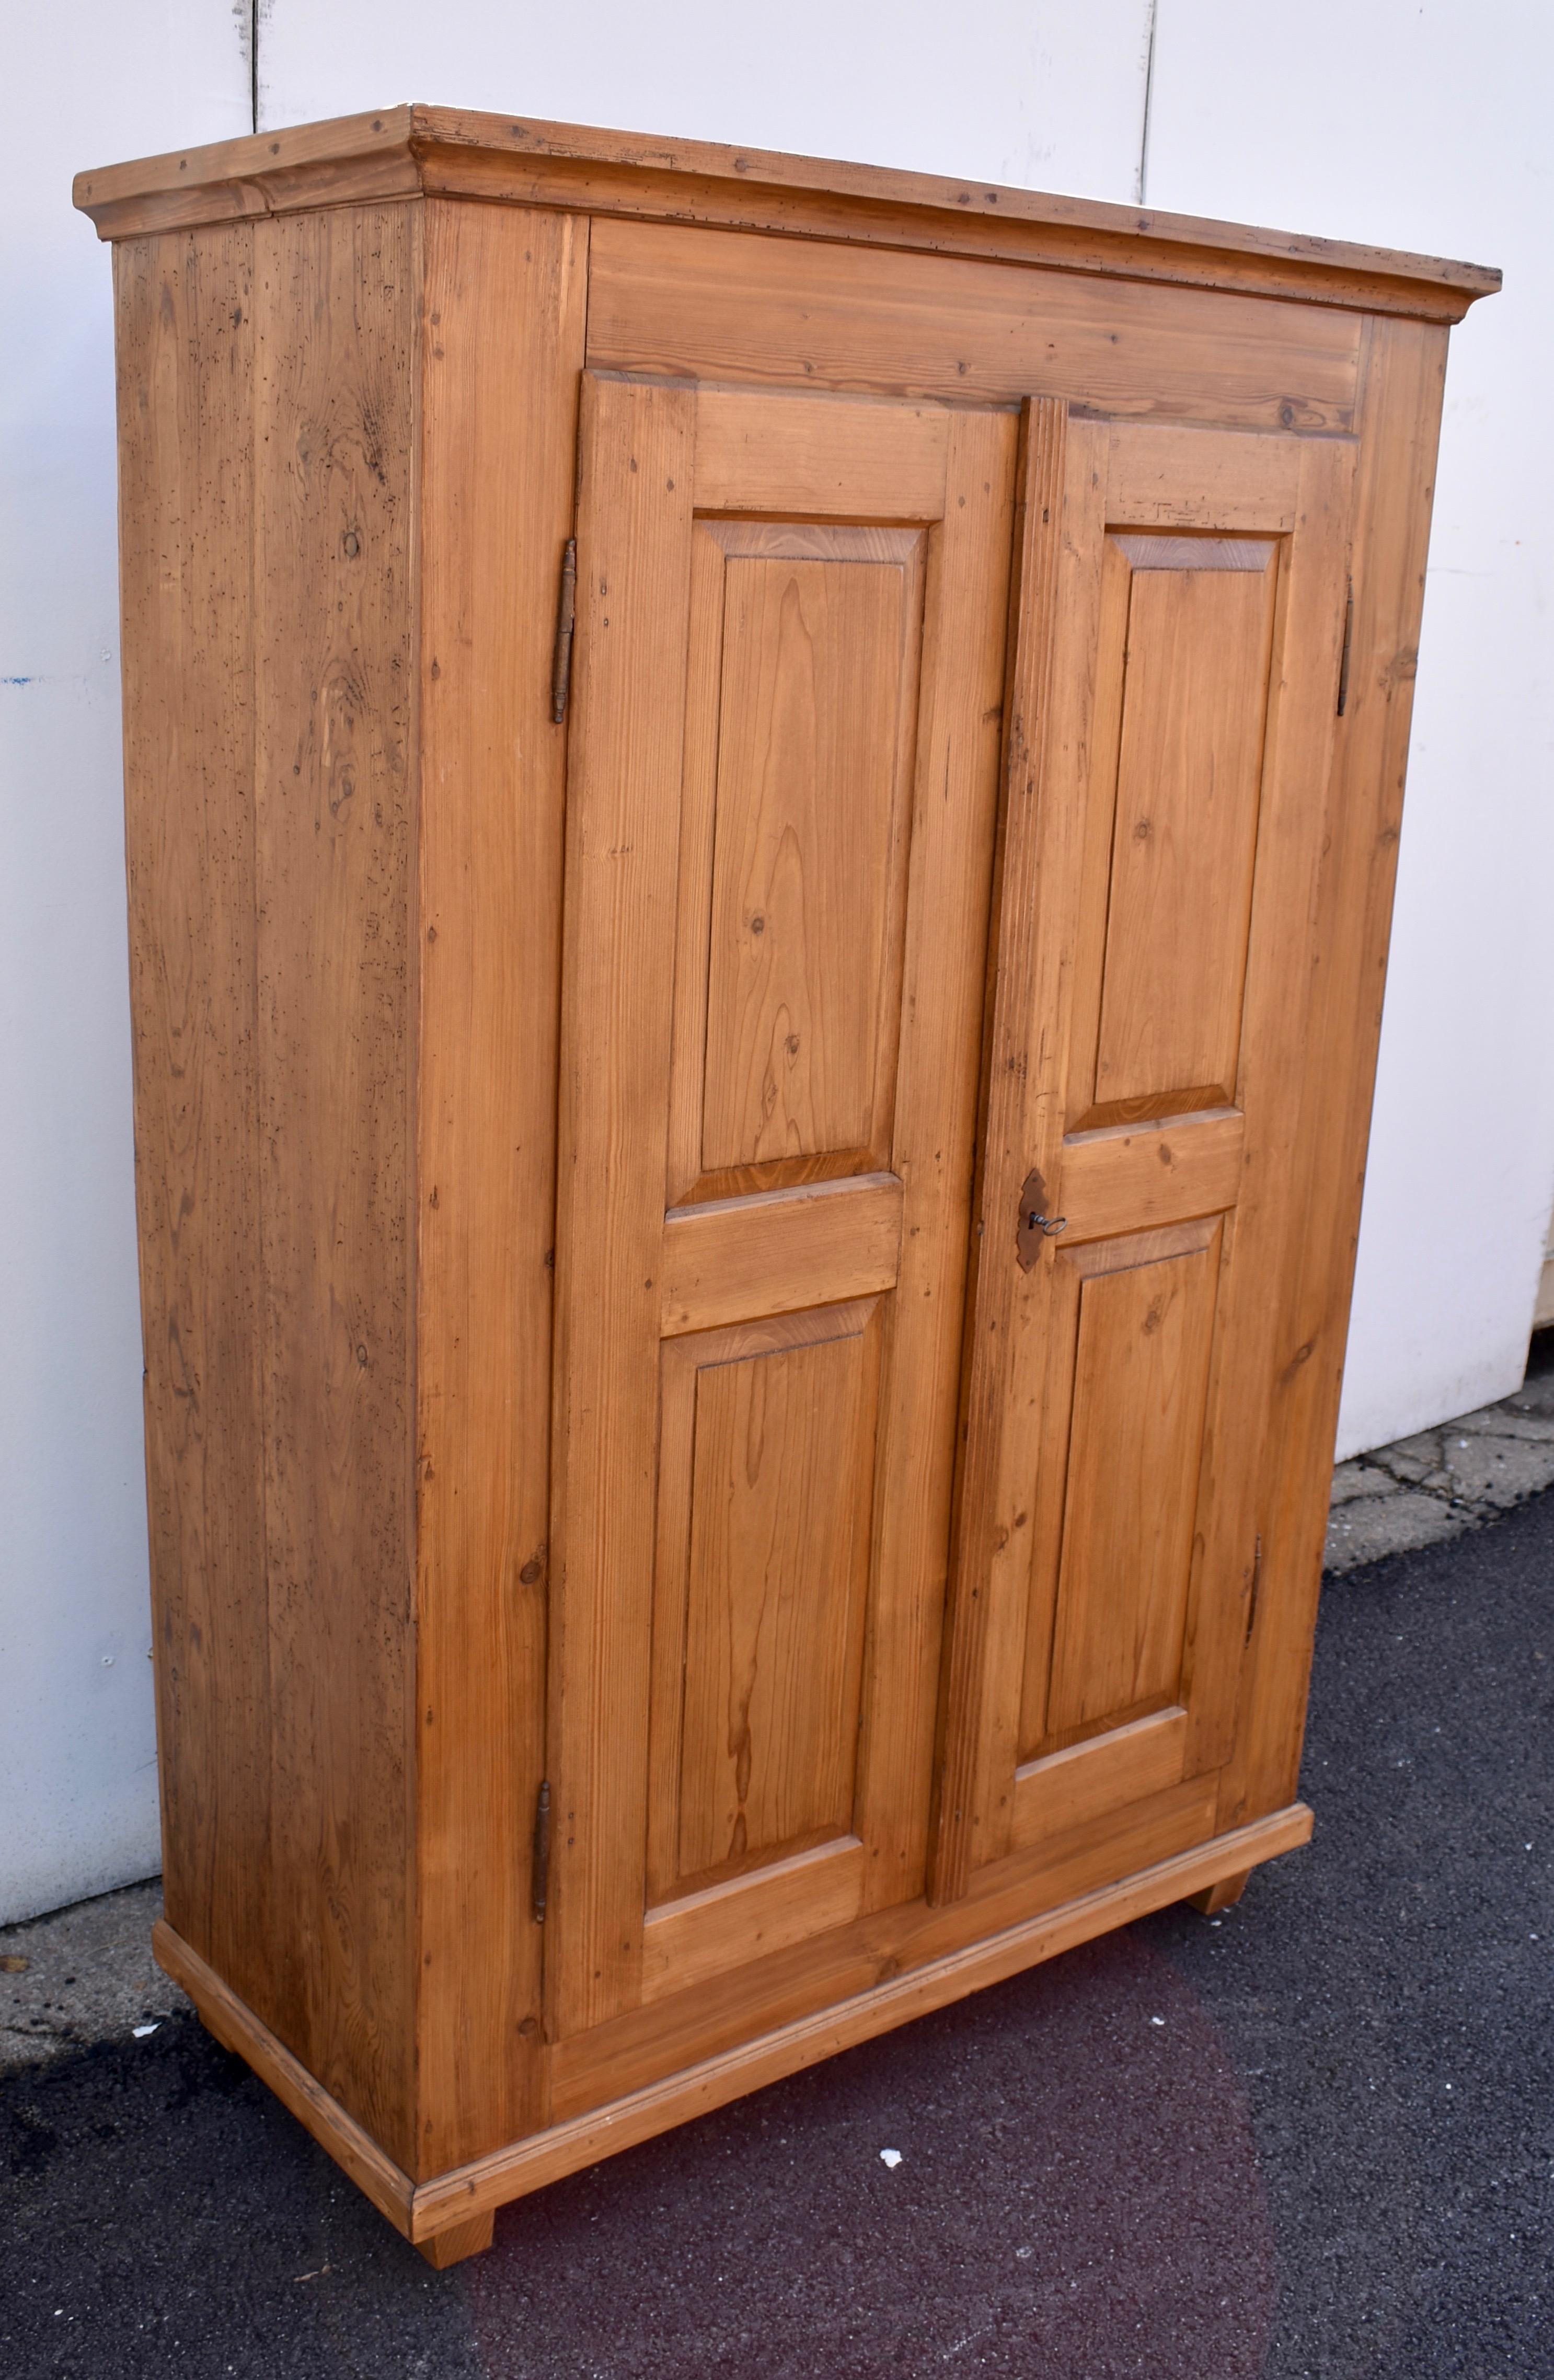 This compact little armoire is every bit as sturdy as it looks and the color is every bit as attractive. Beneath a beautifully simple crown is a plain case standing on square tapered feet. The door frames are all pegged and enclose two raised panels